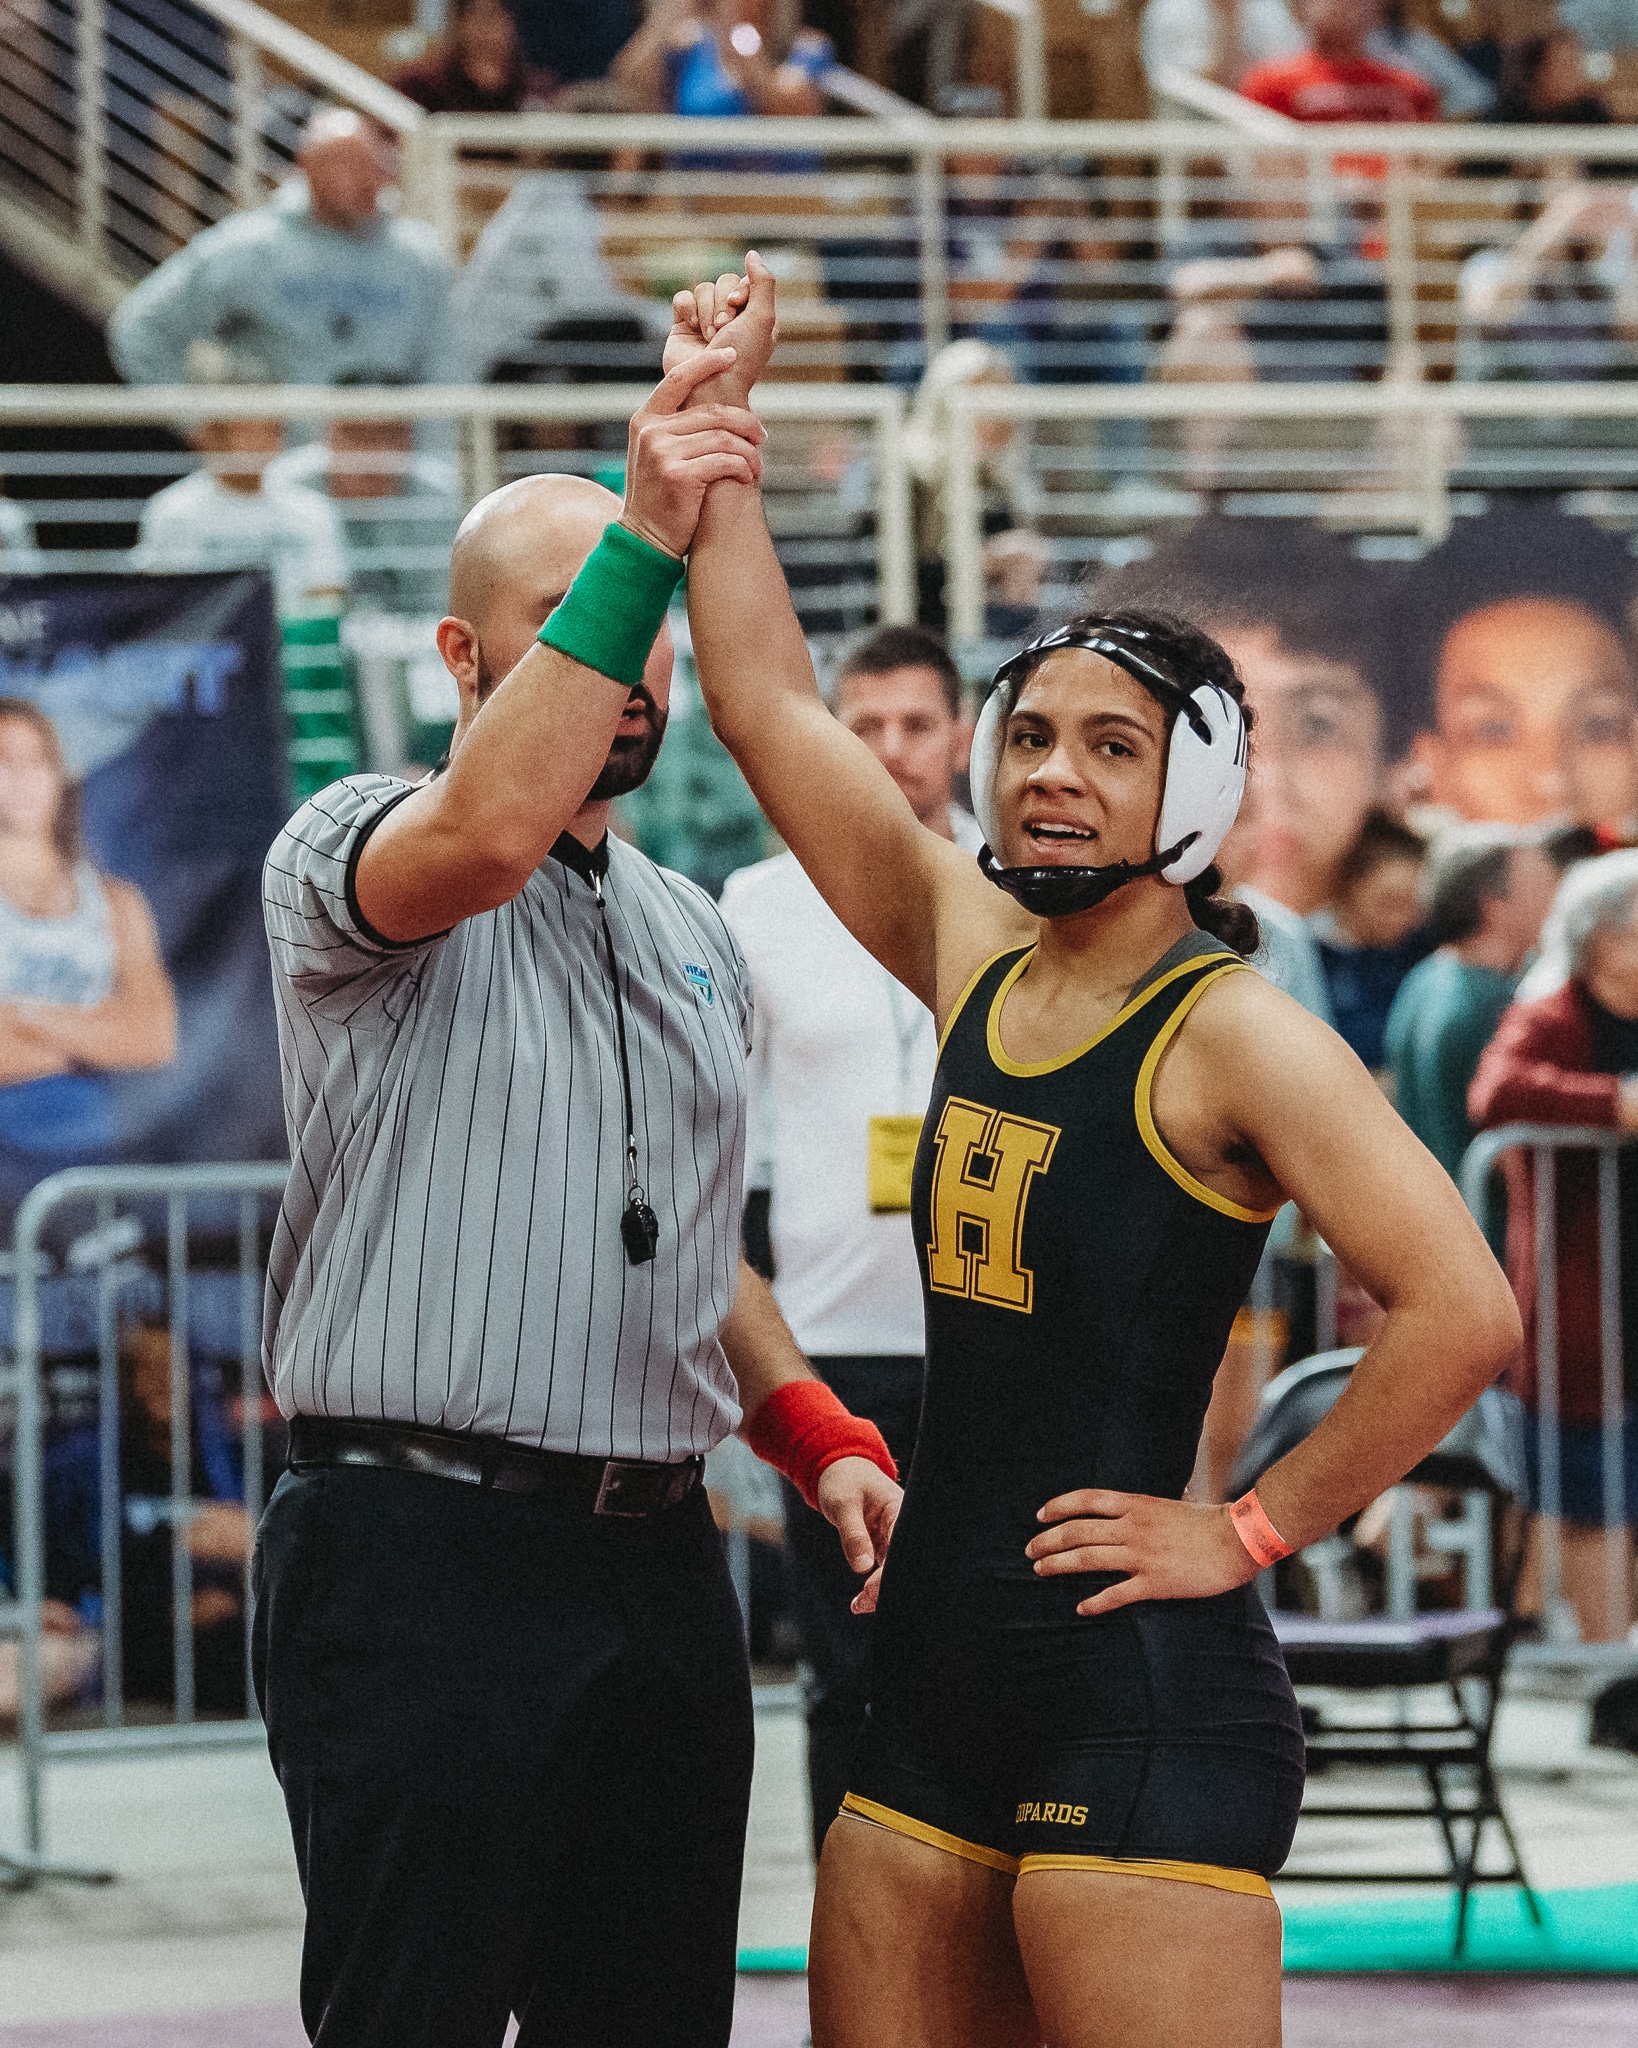 Mariah Earl gets her hand raised at the FHSAA State Wrestling Championship.  [Credit: Cynthia Leota]